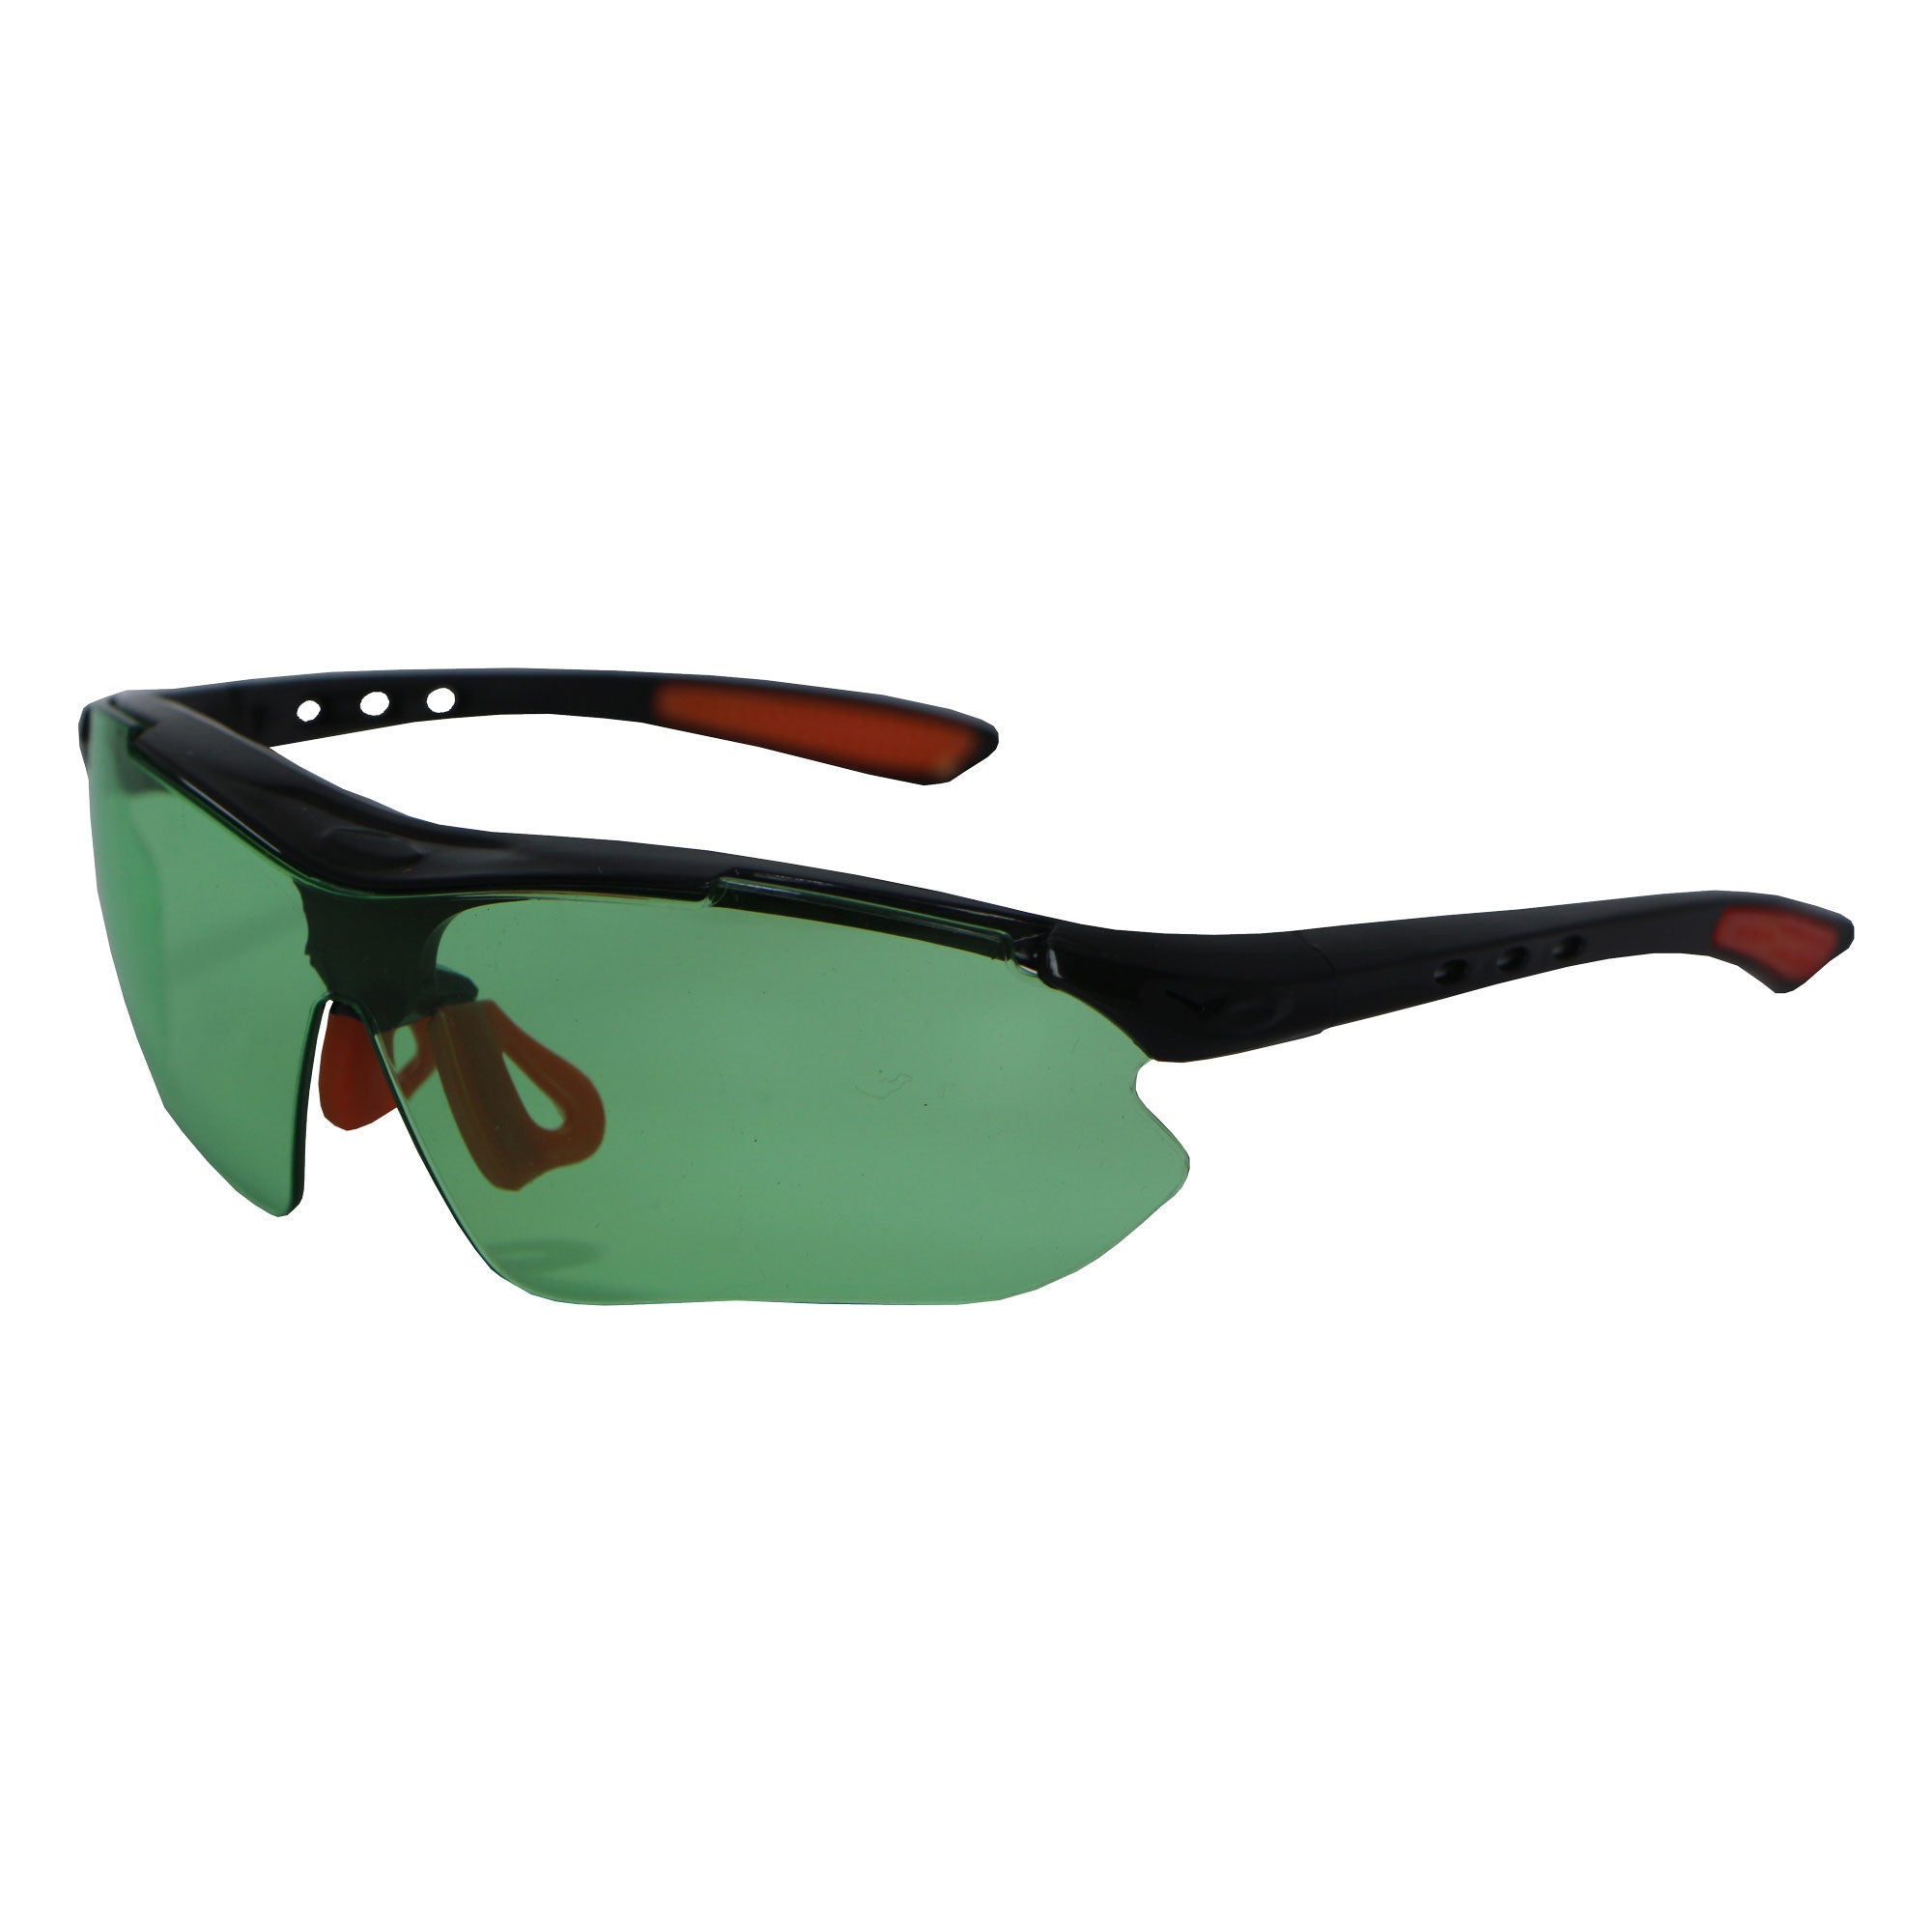 Pinnacle Pro View Elite Safety Spectacles